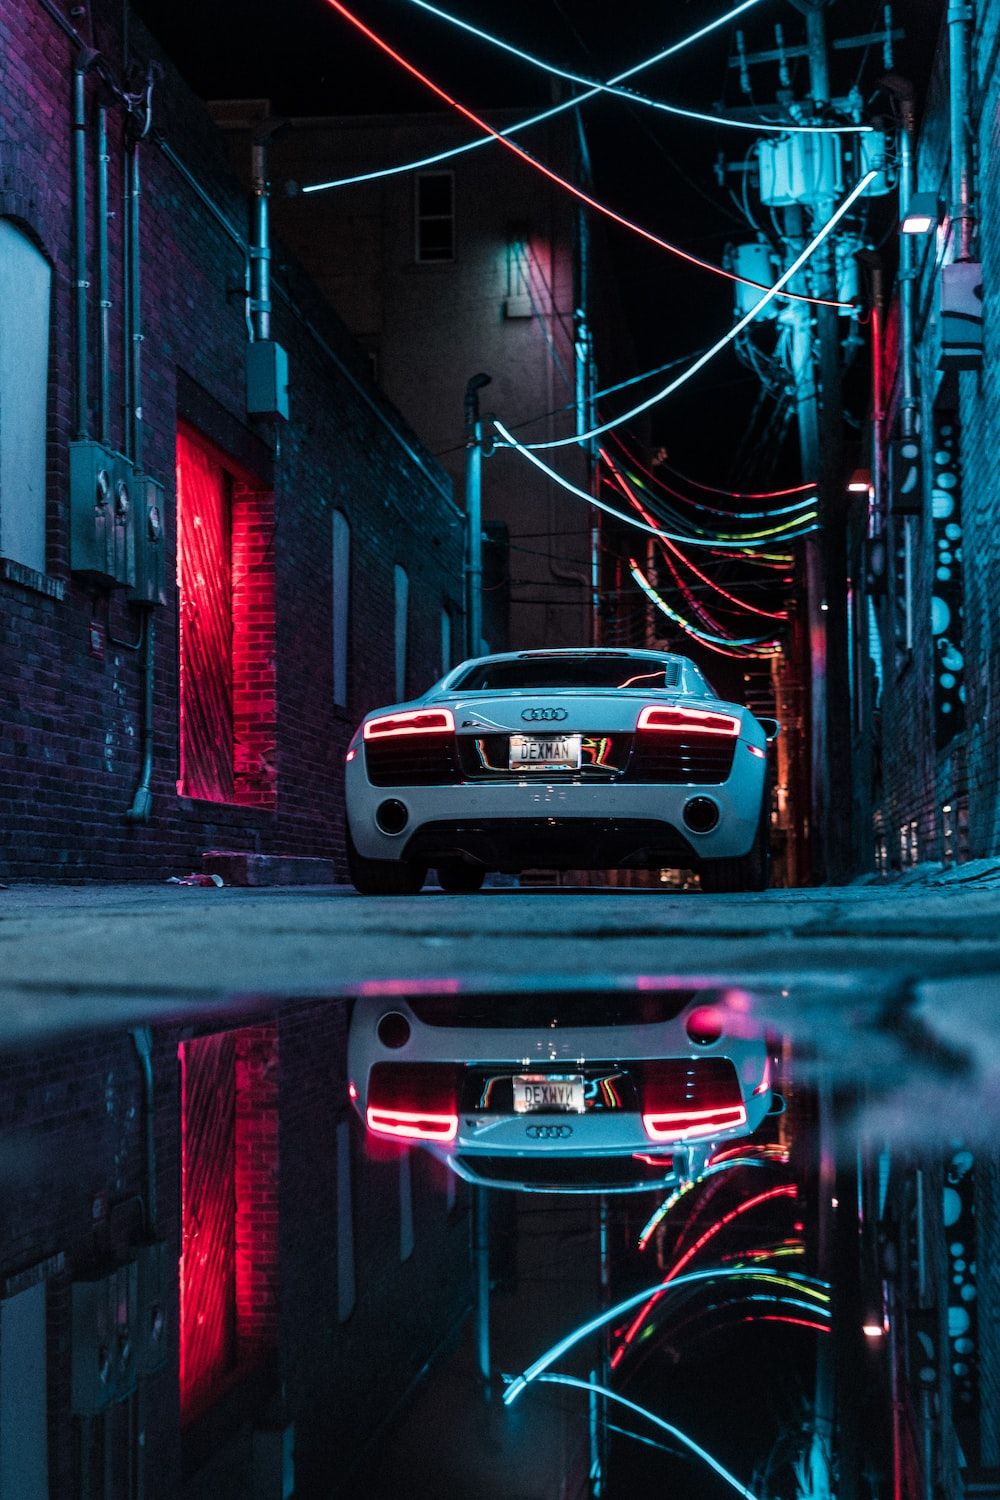 A white car parked in a dark alley with neon lights. - Cars